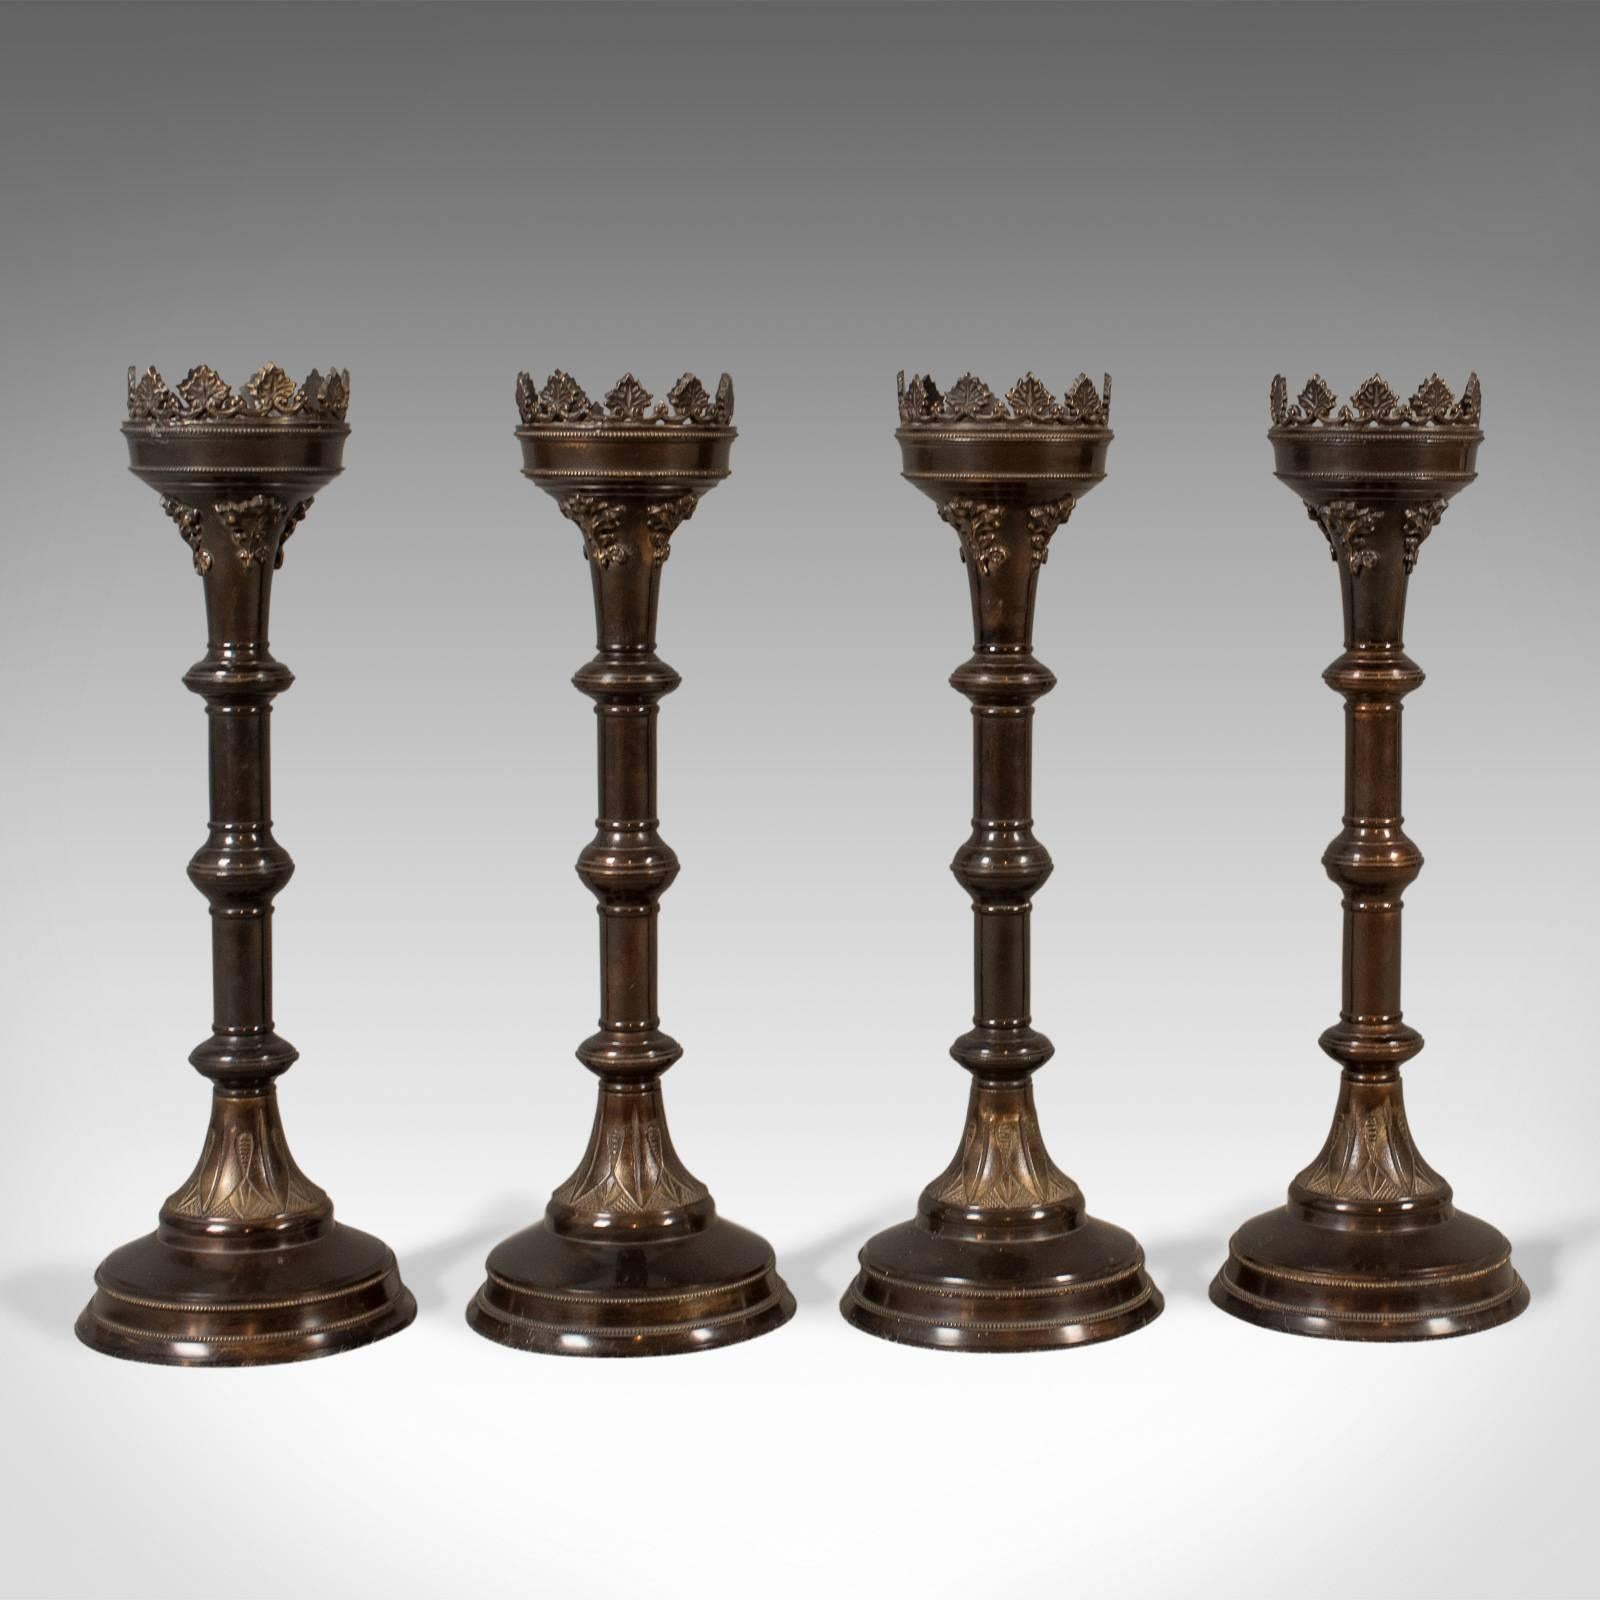 This is a bold set of four large candlesticks, church candle pricket torcheres in the Victorian taste with Gothic overtones.

Candlesticks for large four inch church candles
Offering a stable and solid mount with pricket cradles
Bronzed,